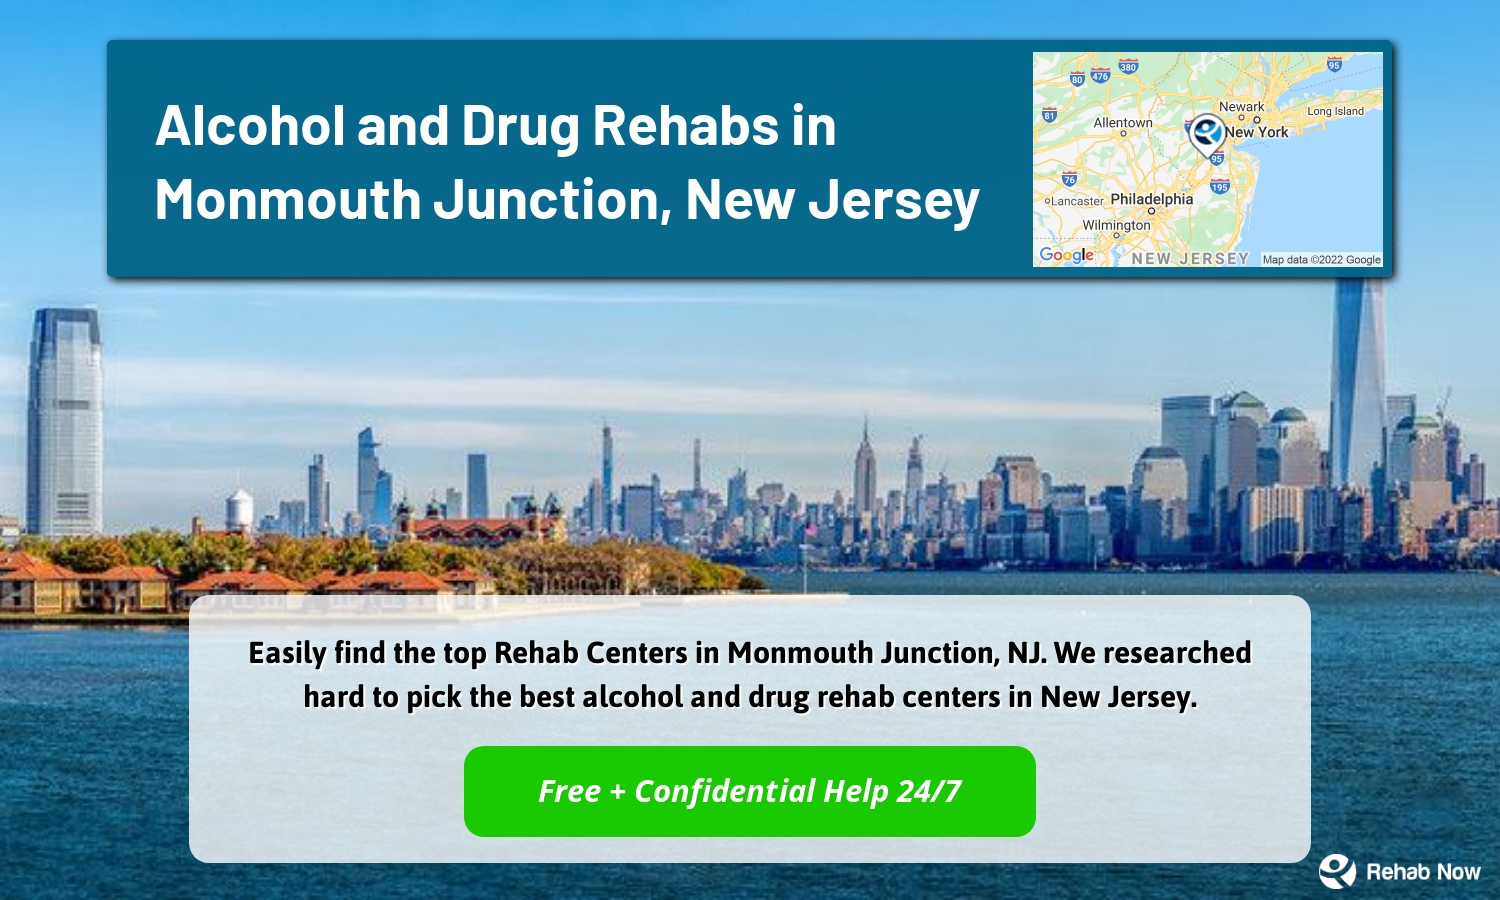 Easily find the top Rehab Centers in Monmouth Junction, NJ. We researched hard to pick the best alcohol and drug rehab centers in New Jersey.